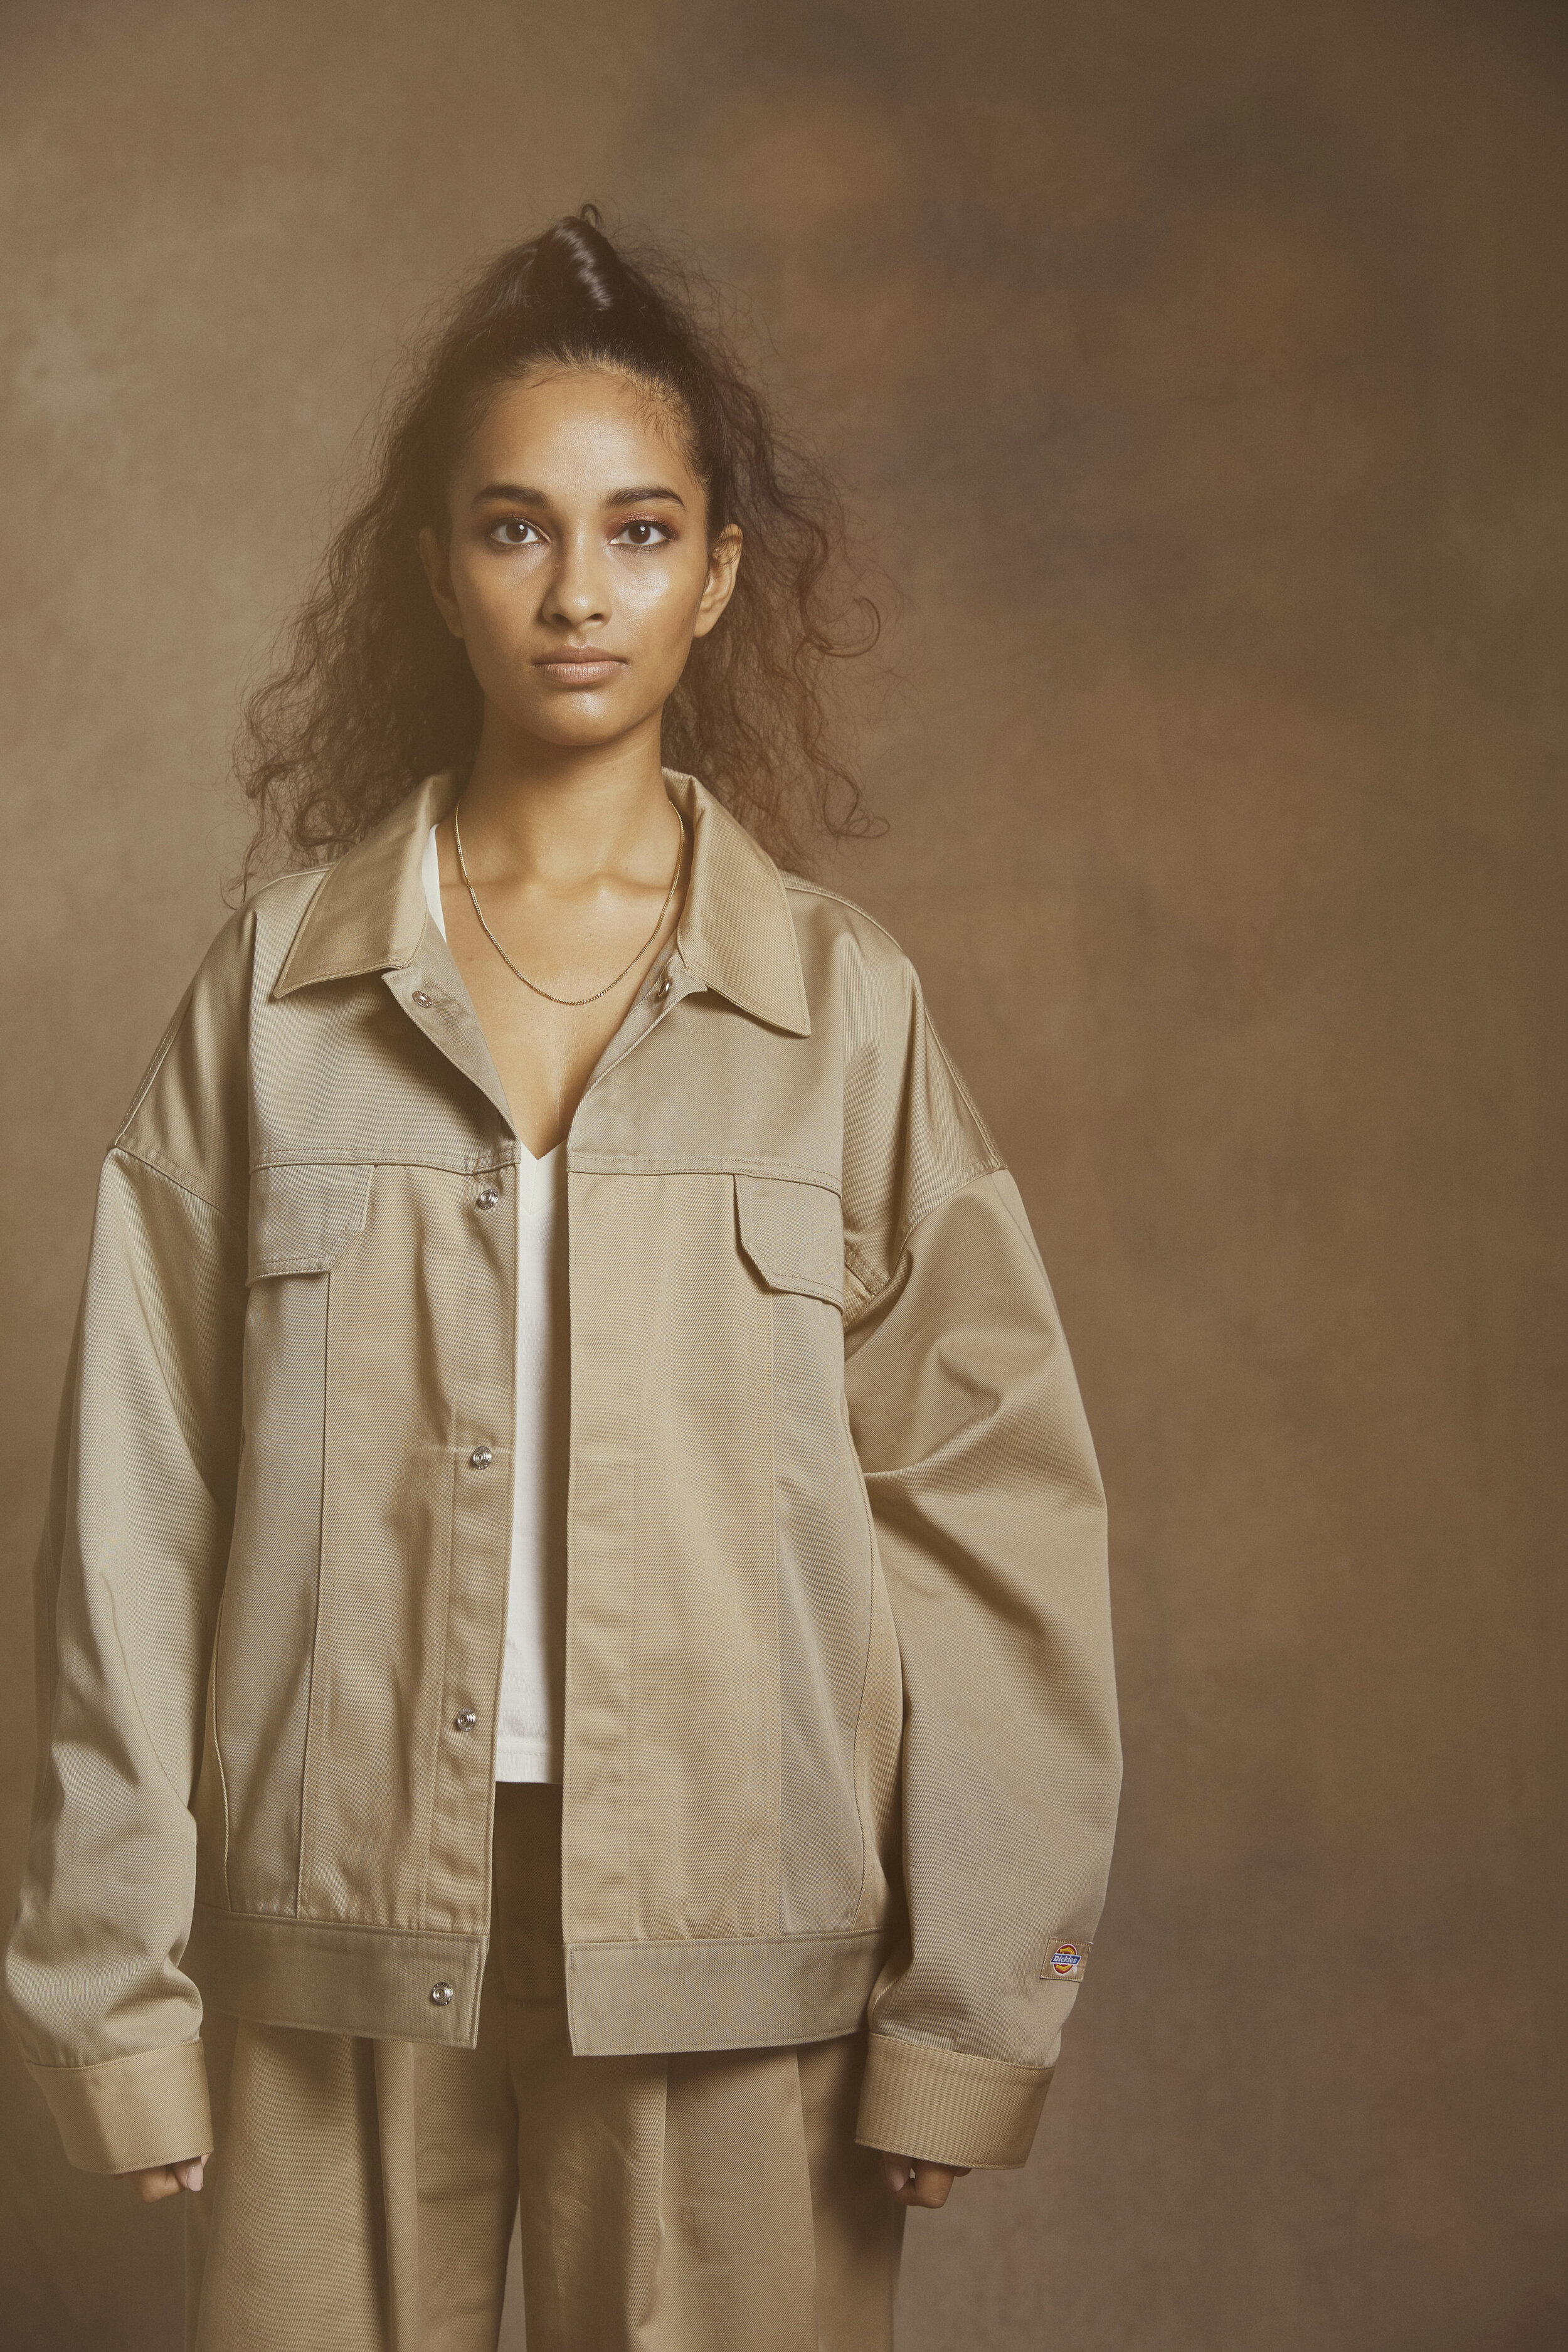 MAGIC STICK Enlists Dickies' Expertise for Tonal A/W Capsule